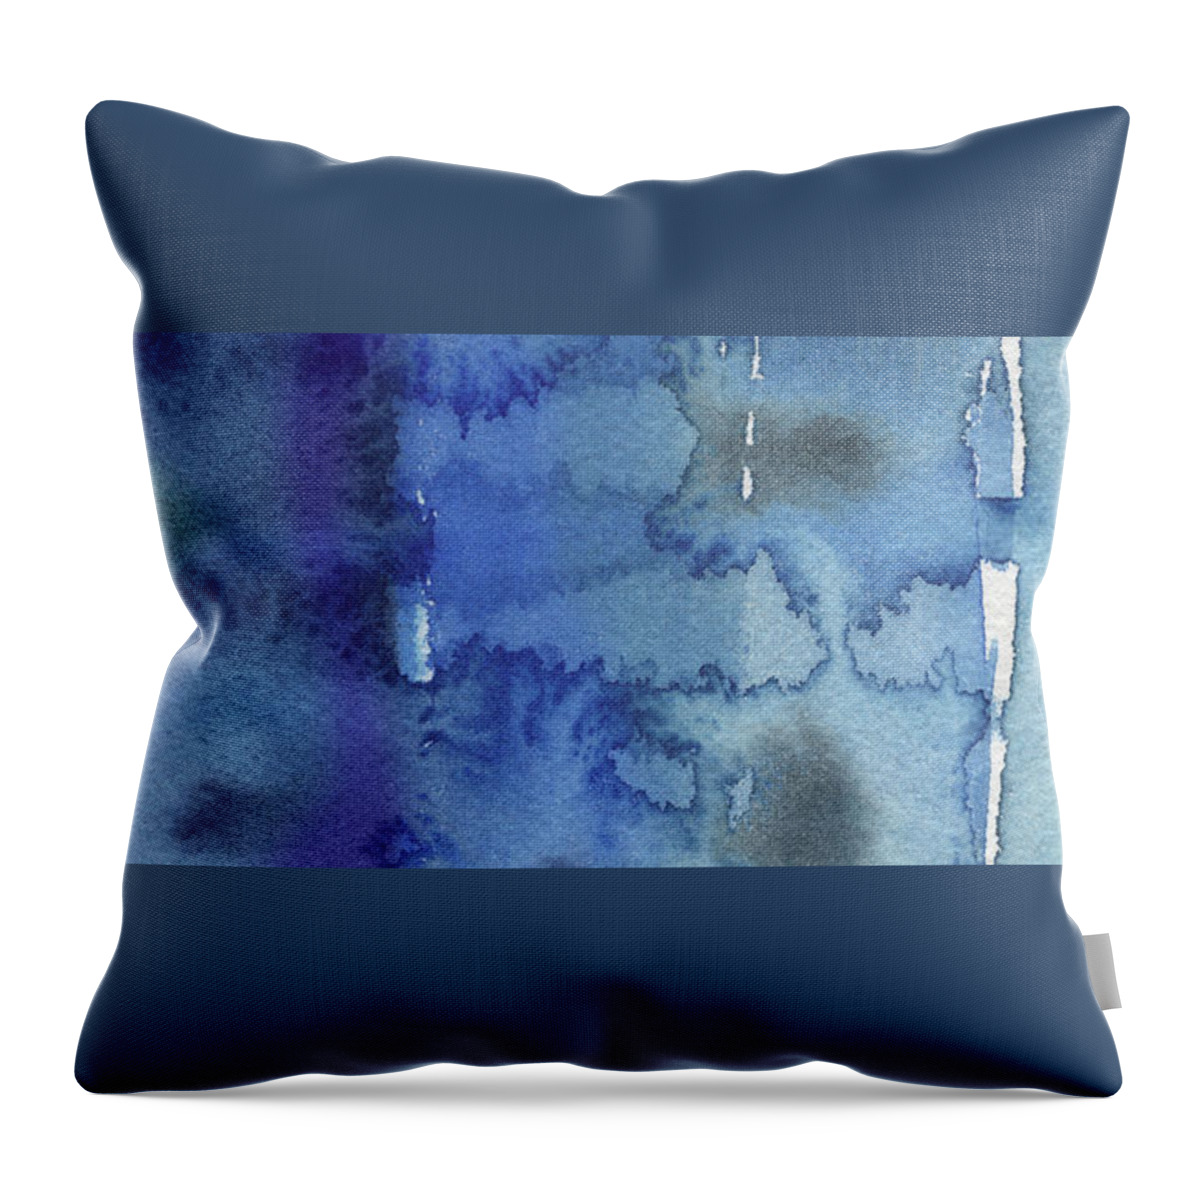 Blue Throw Pillow featuring the painting Blue Abstract Cool Waters III by Irina Sztukowski